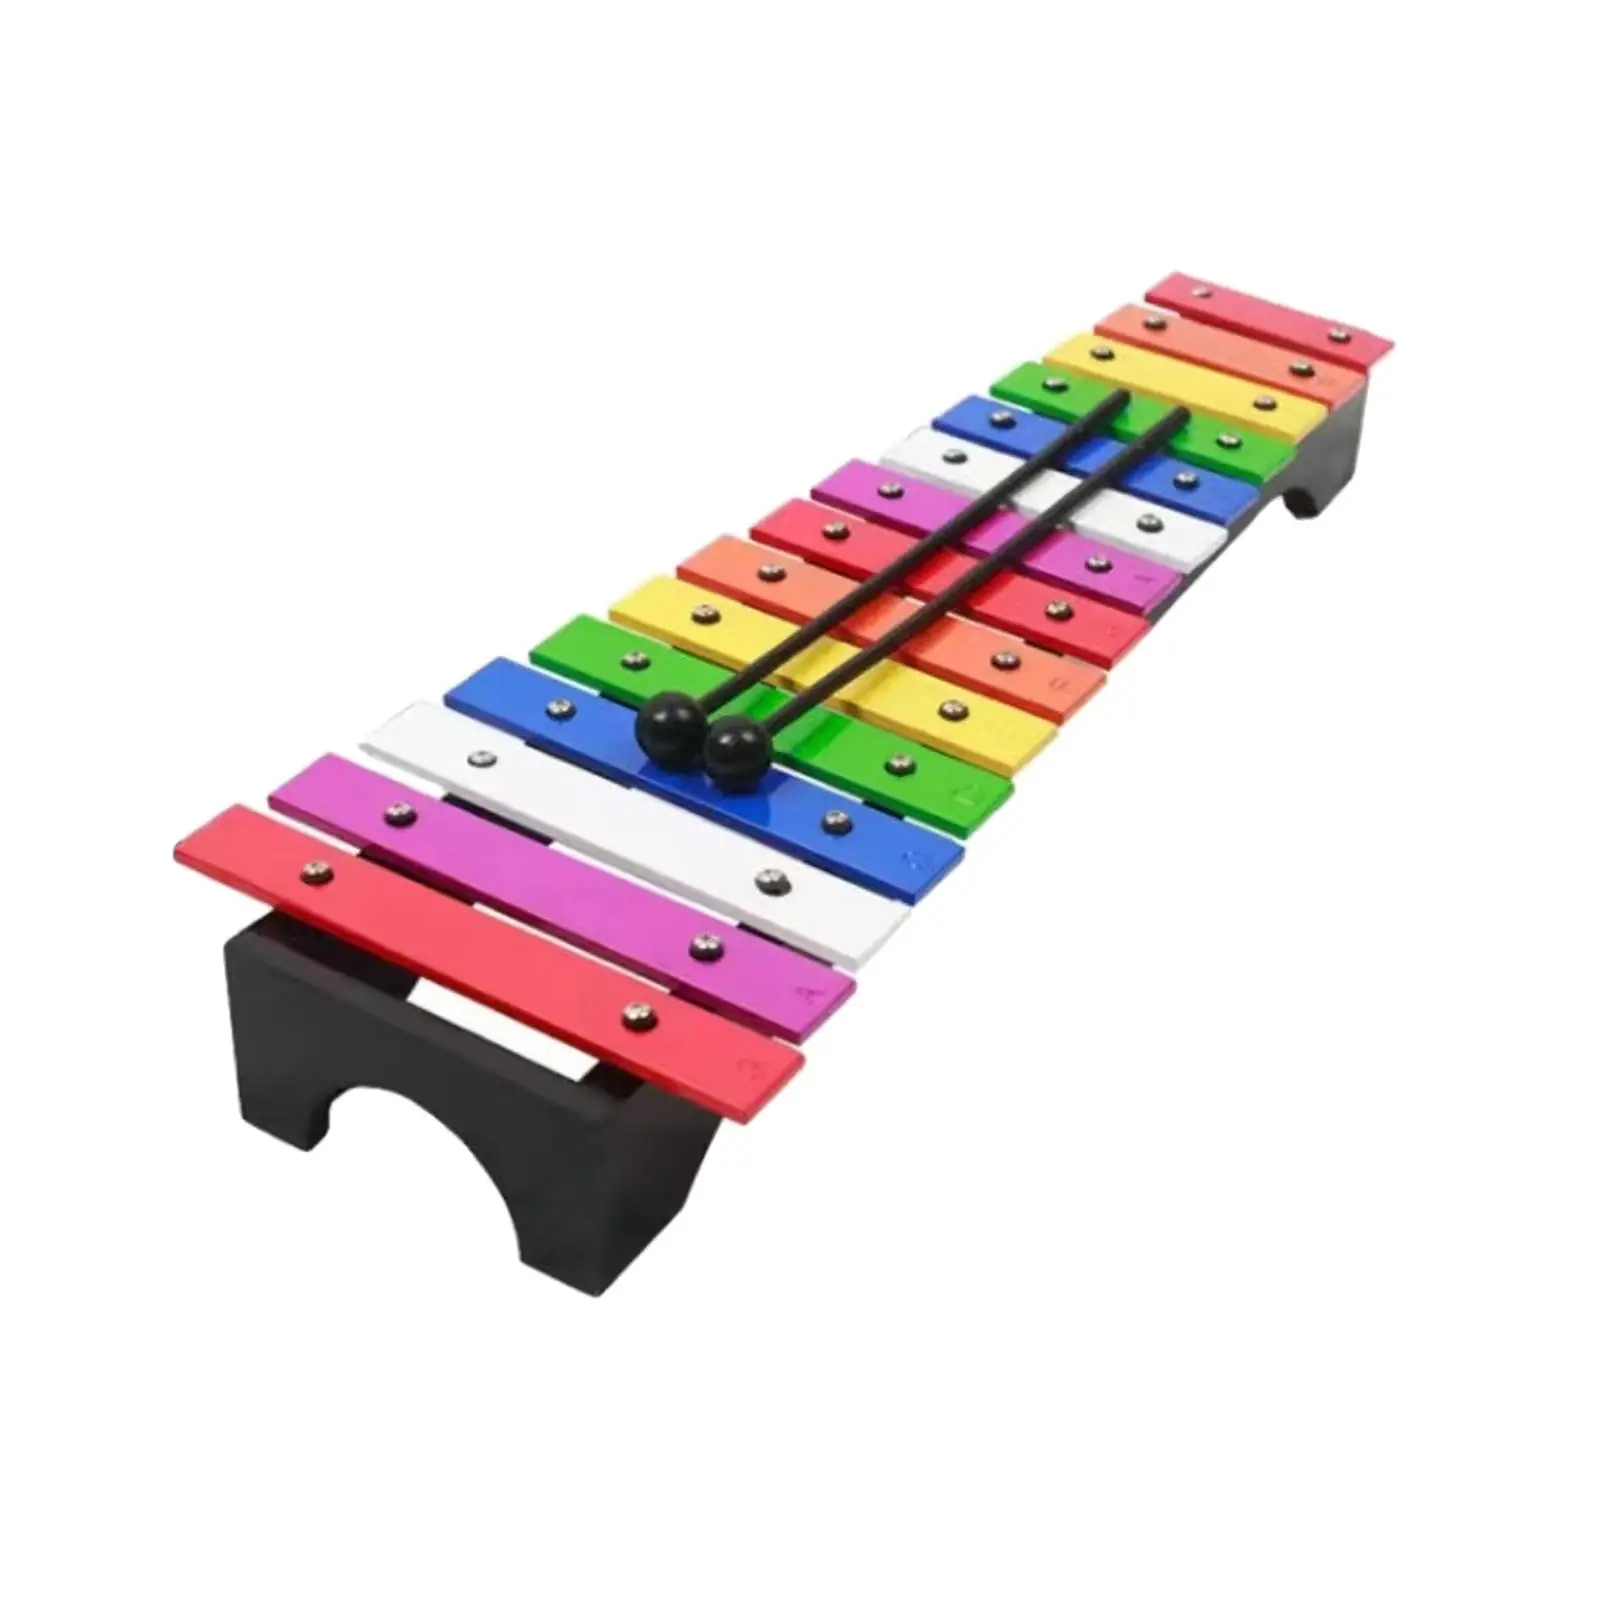 15 Note Glockenspiel Portable Wooden Percussion Toys Xylophone for Kids for Outside Concert Live Performance Event Music Lessons